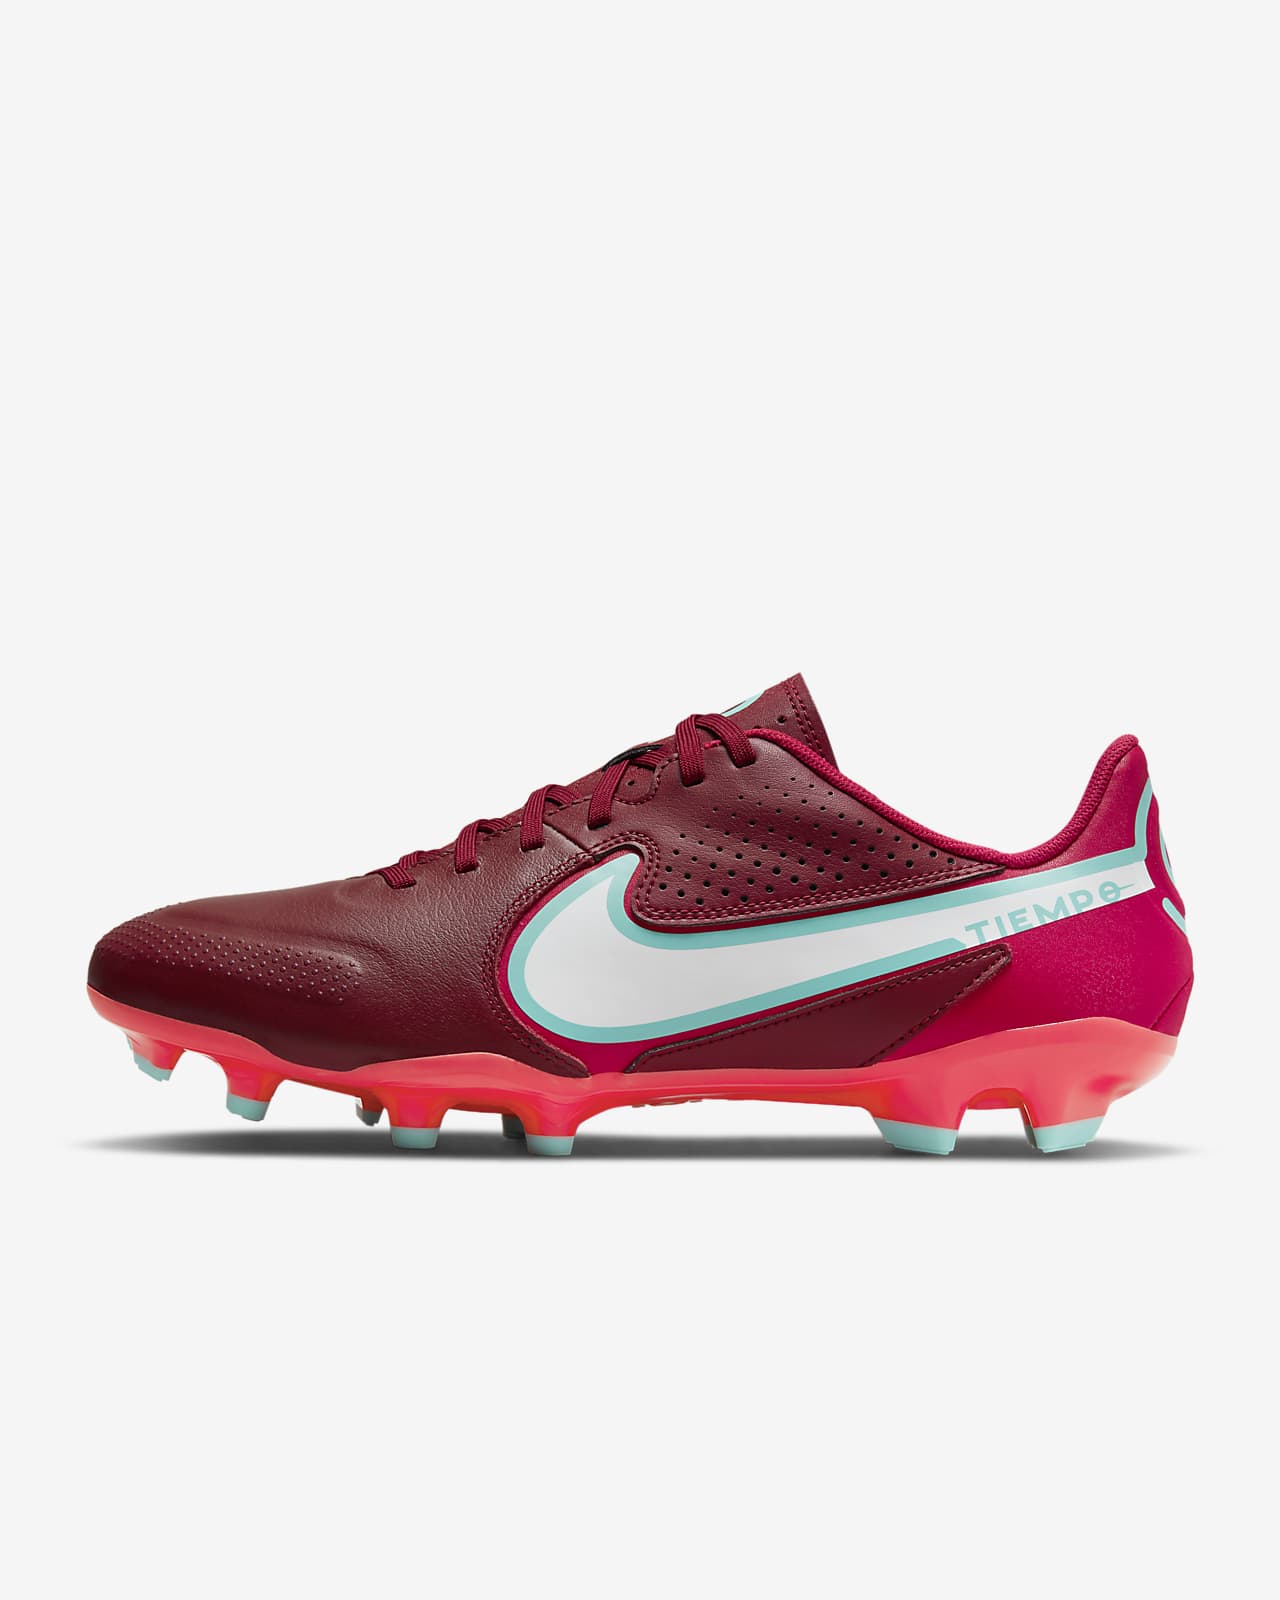 Chaussure de football multi-surfaces à crampons Nike Tiempo Legend 9 Academy MG